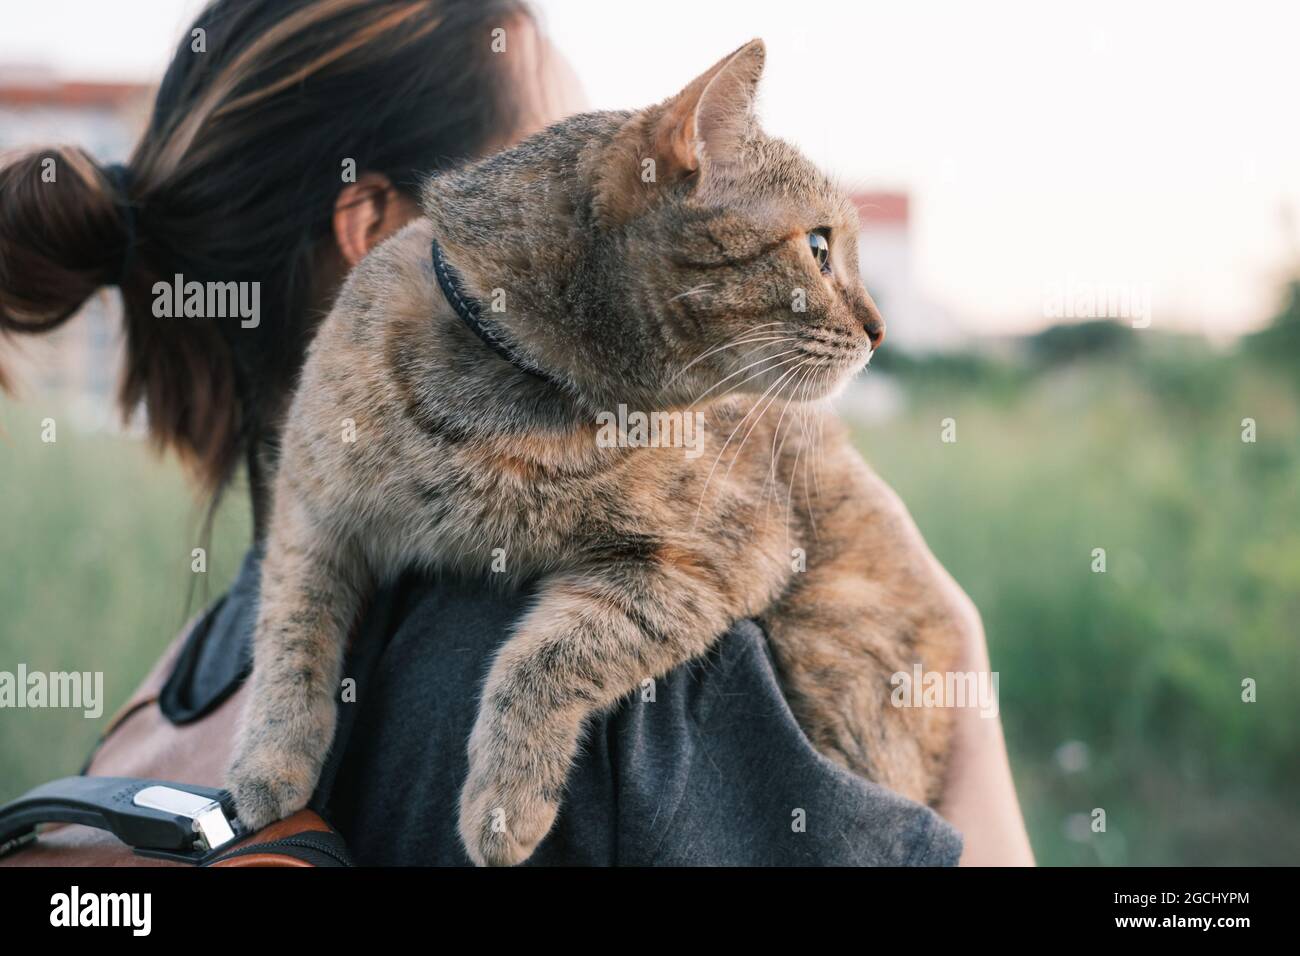 Curious cat sitting on shoulder of woman outdoor. Stock Photo